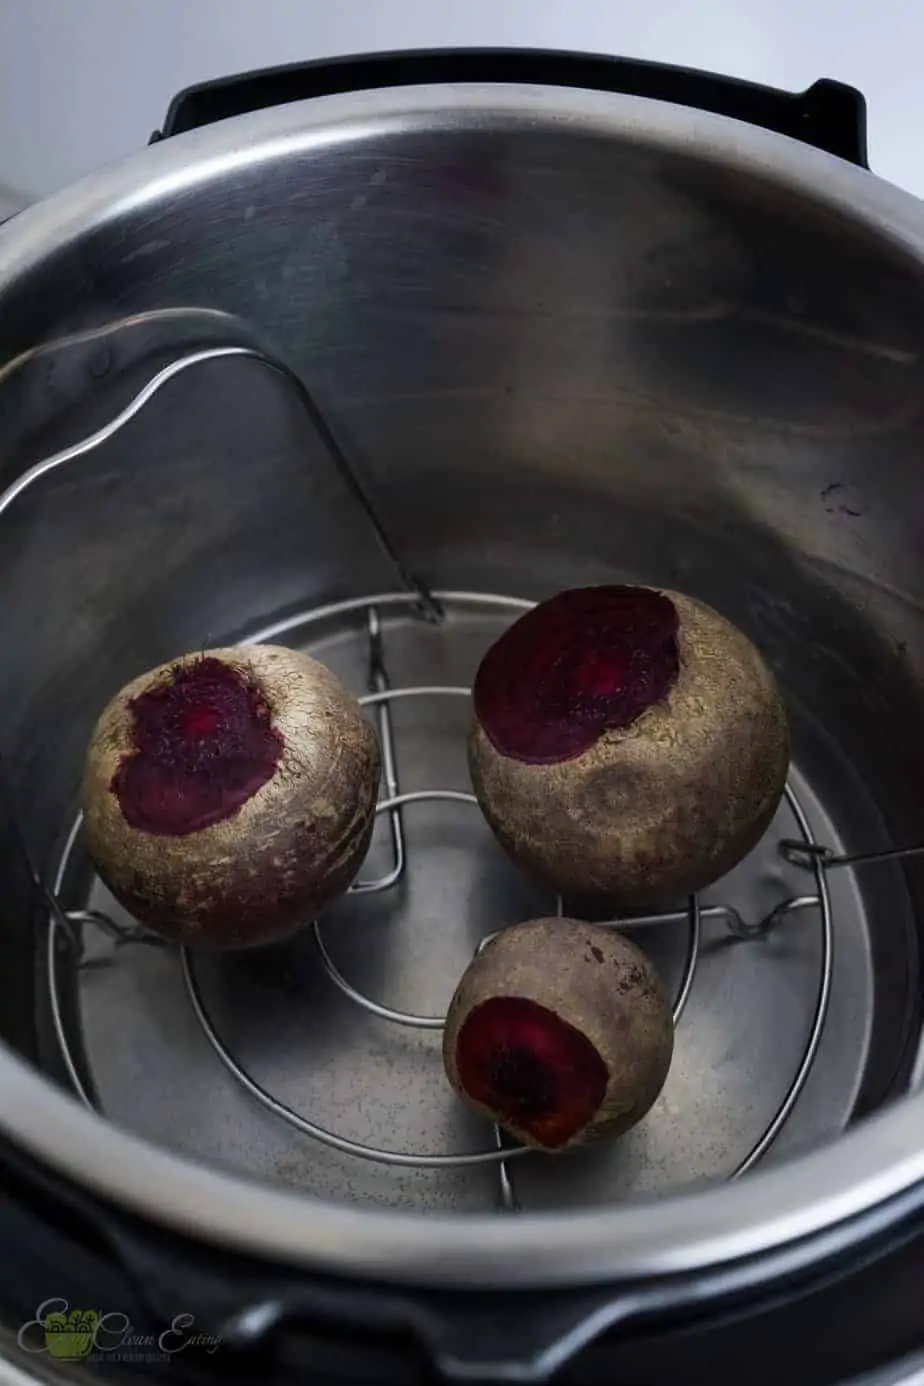 raw beets inside the pressure cooker with water before cooking.